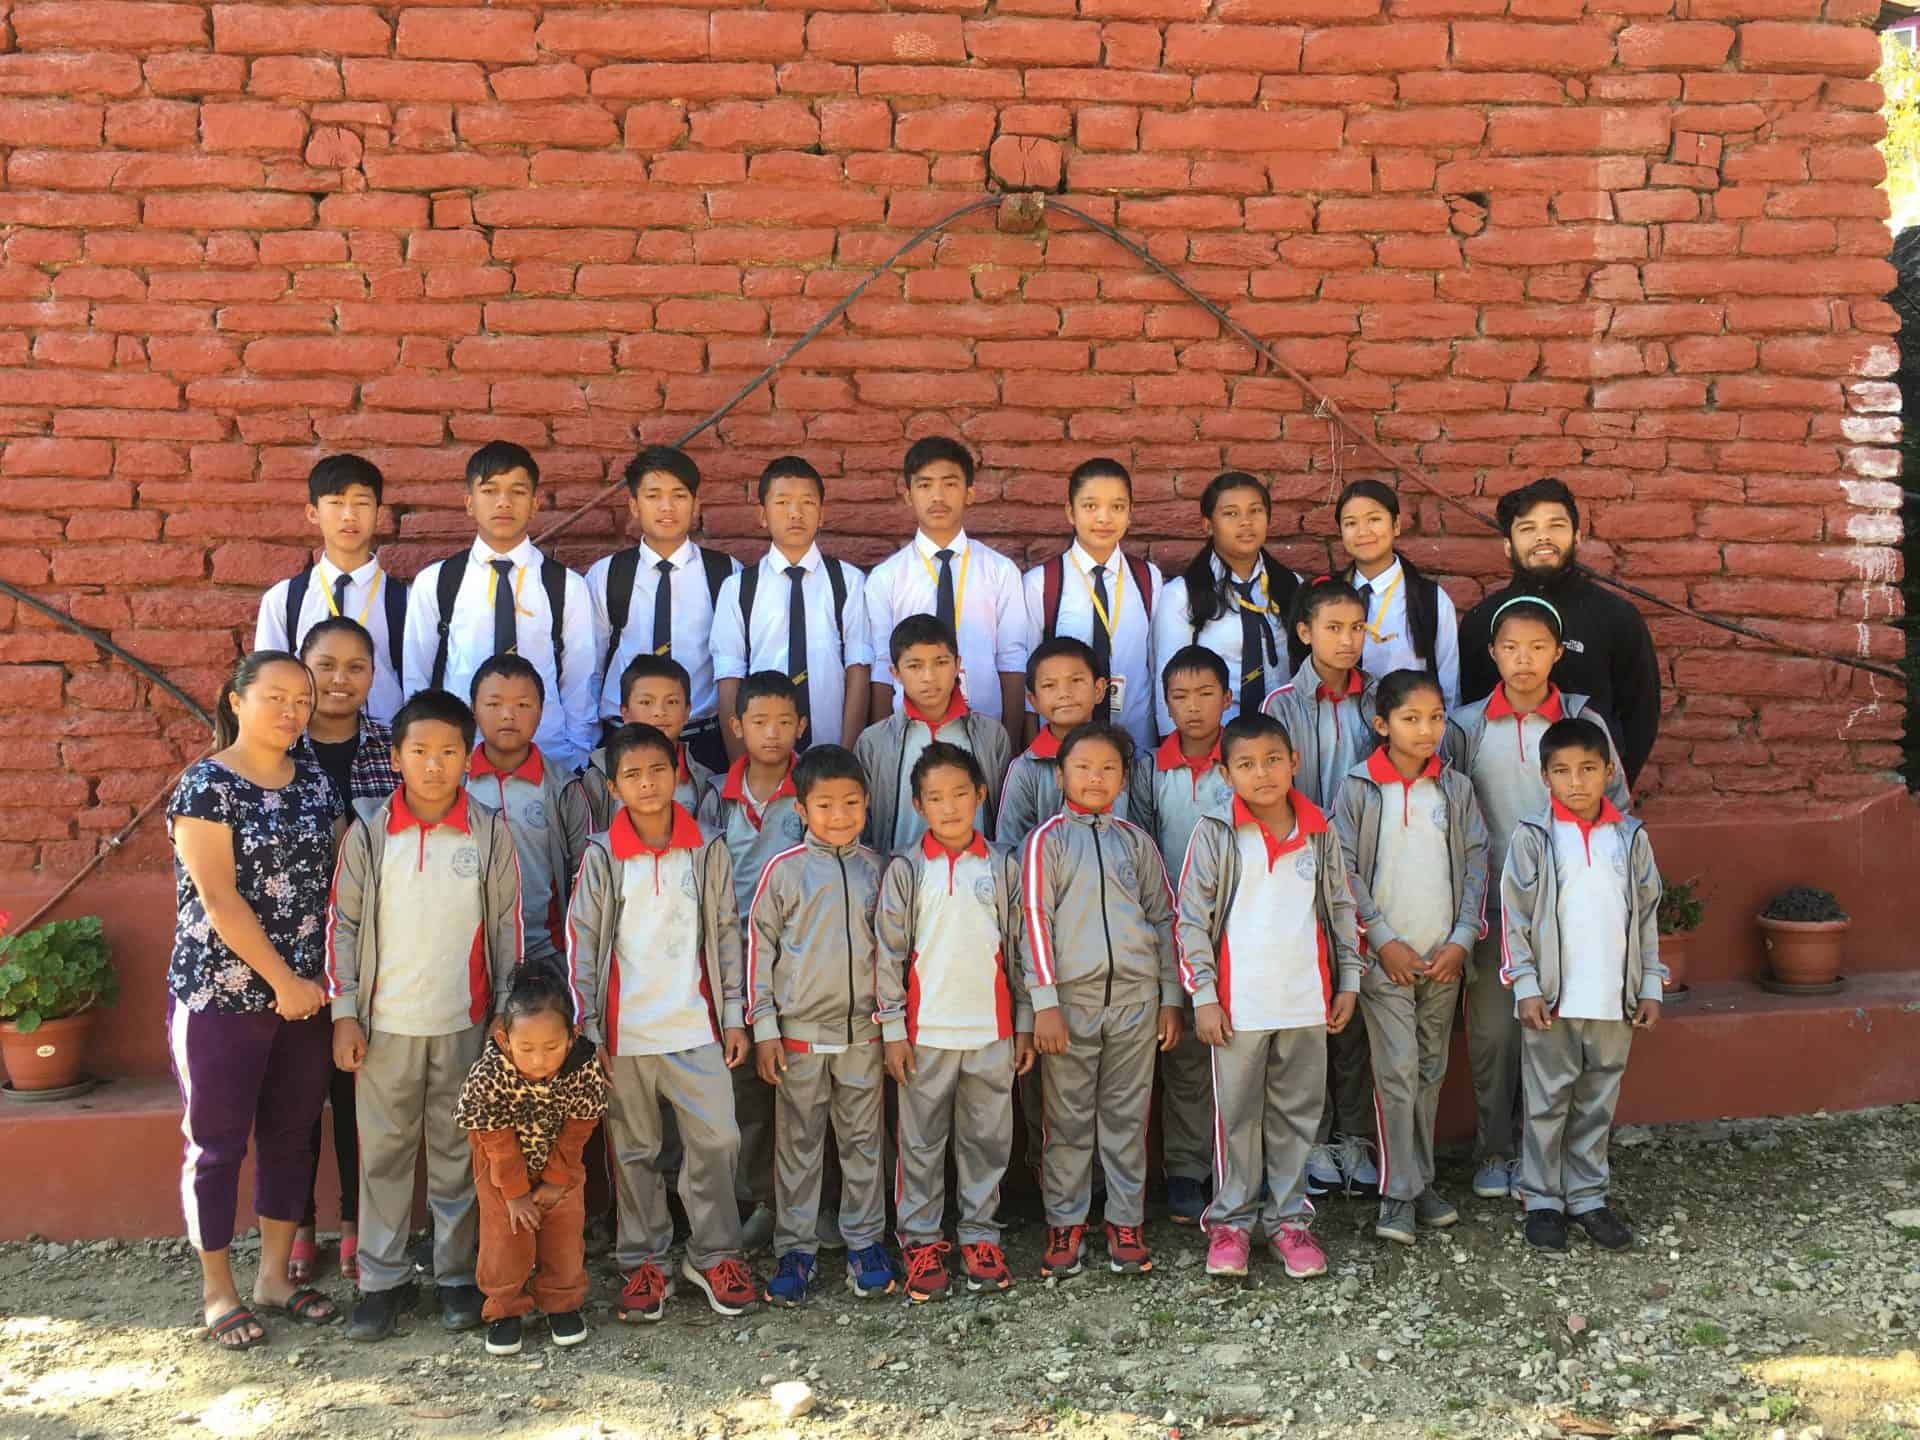 Children from the Ulleri Children's home by Himalayan Life stand outside their home